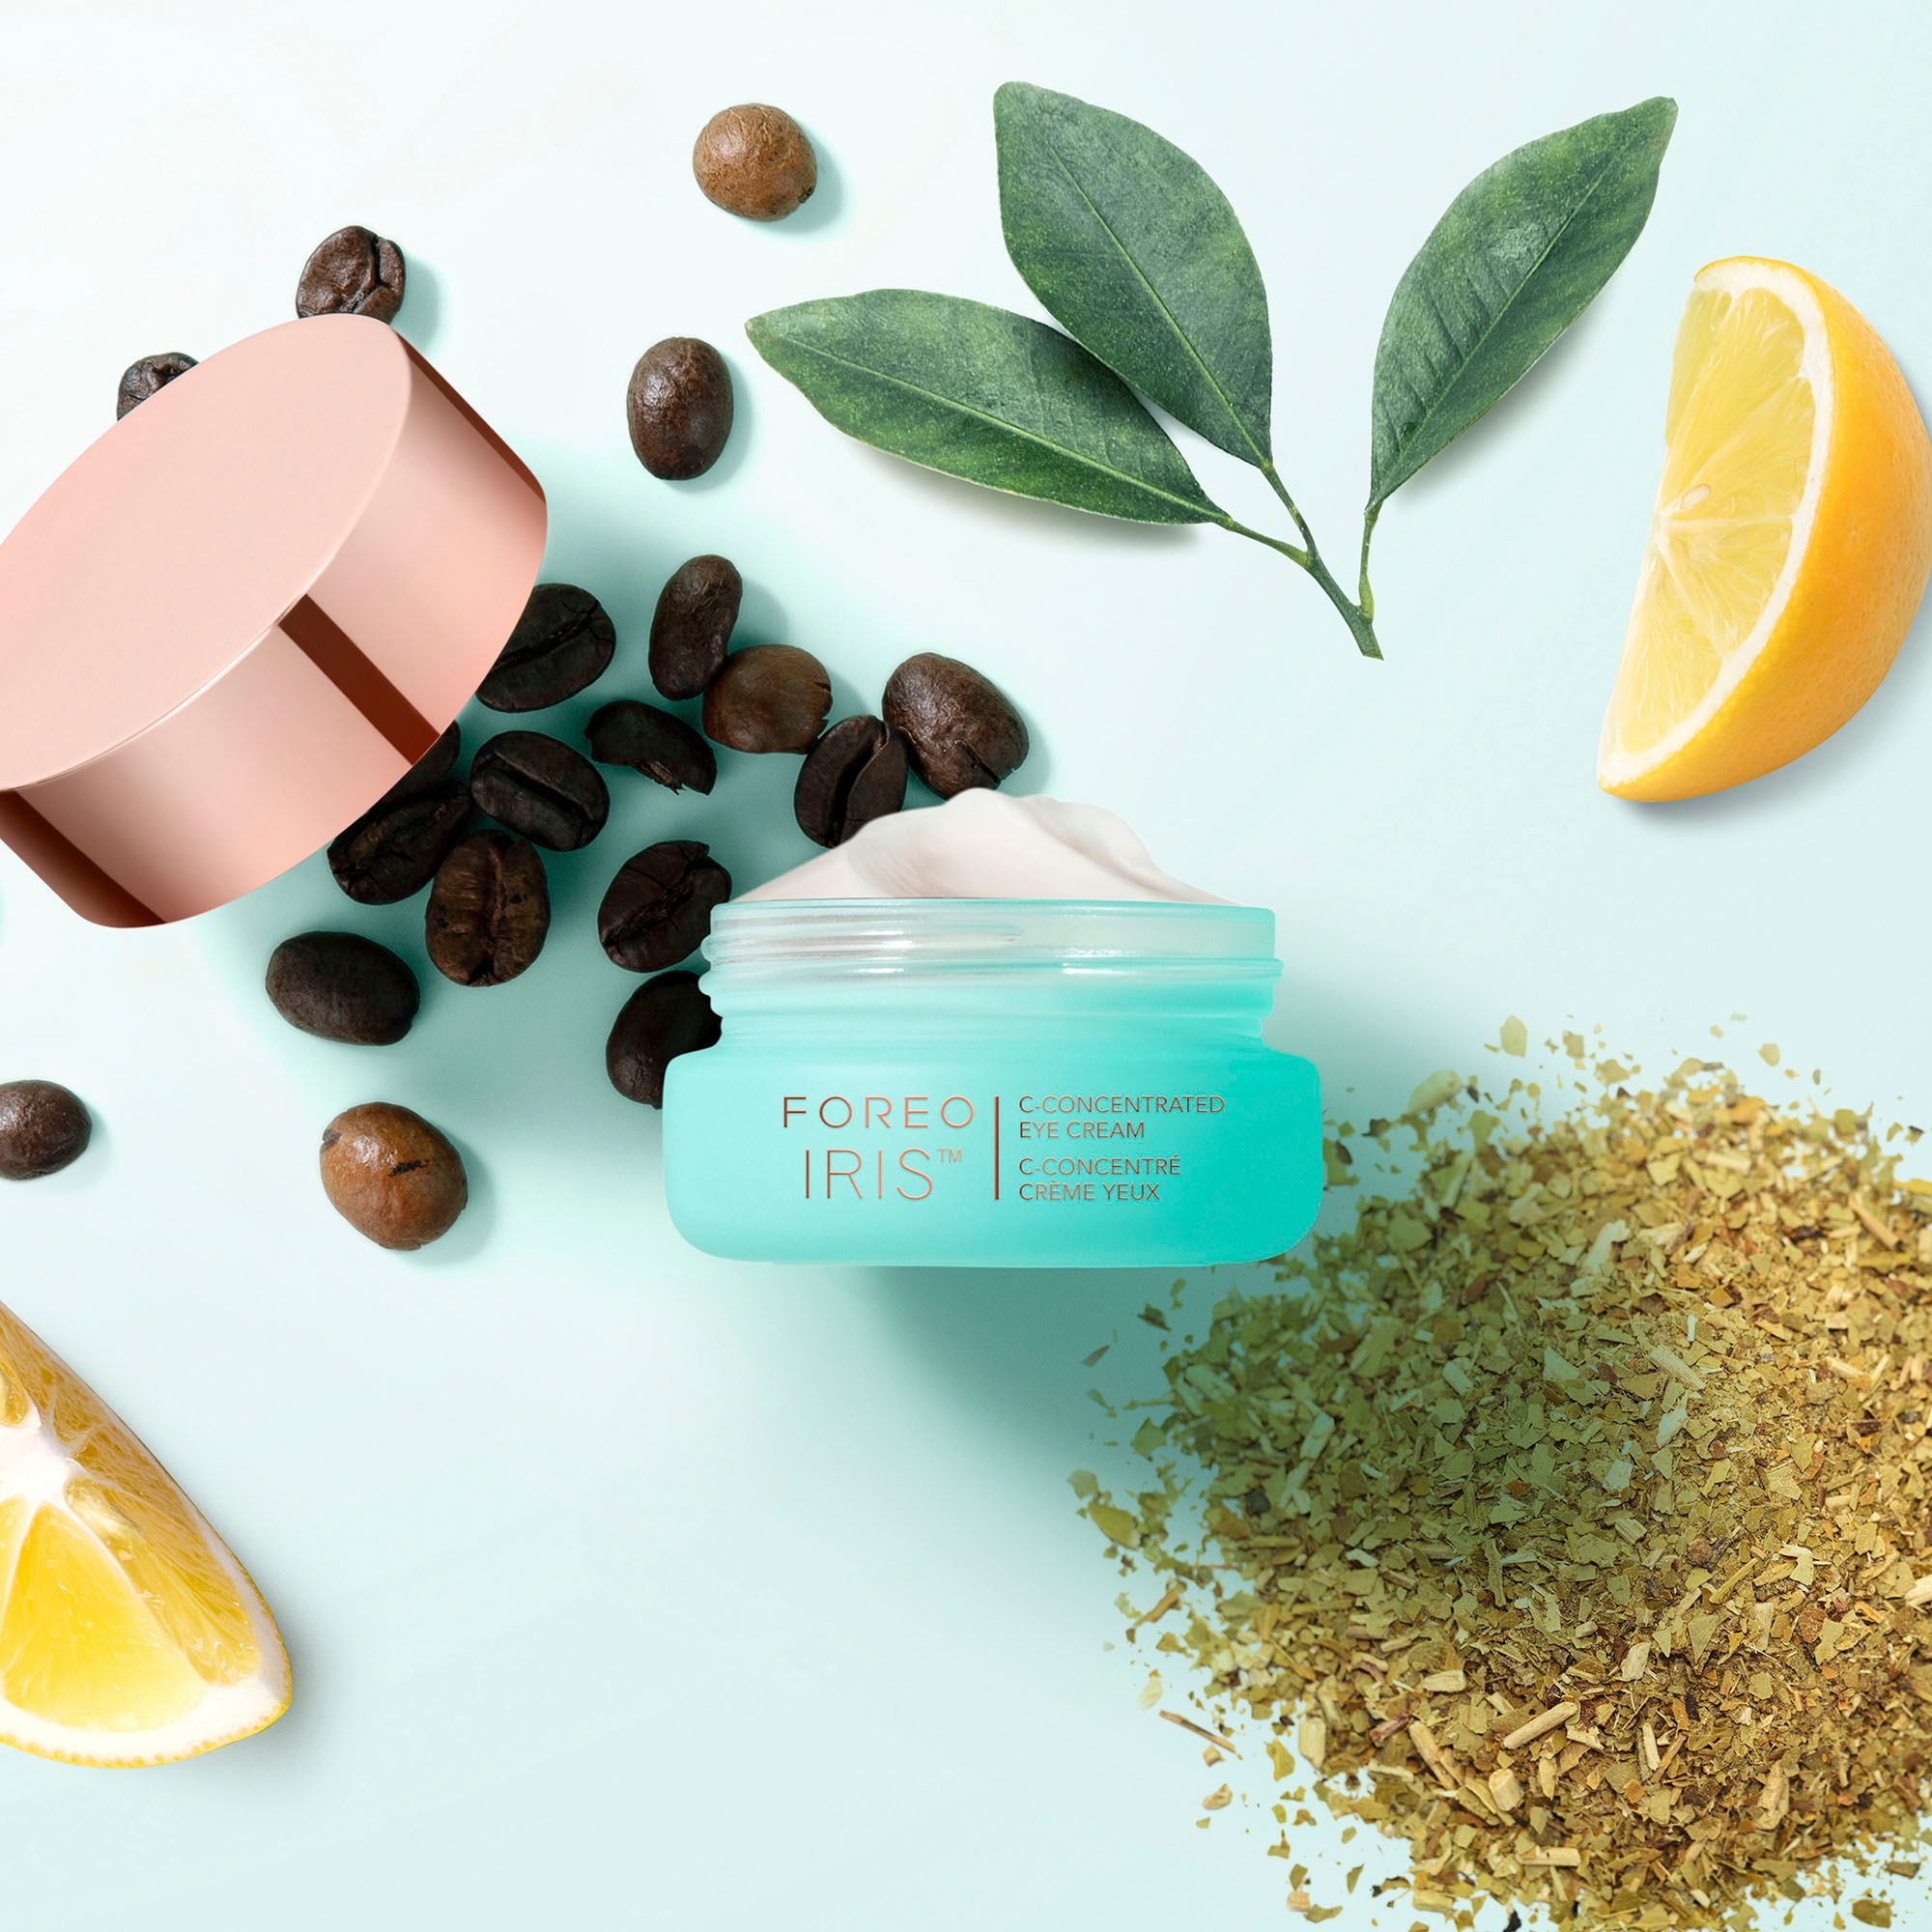 FOREO bei ml« C-CONCENTRATED EYE CREAM OTTOversand 15 »IRIS™ Augencreme